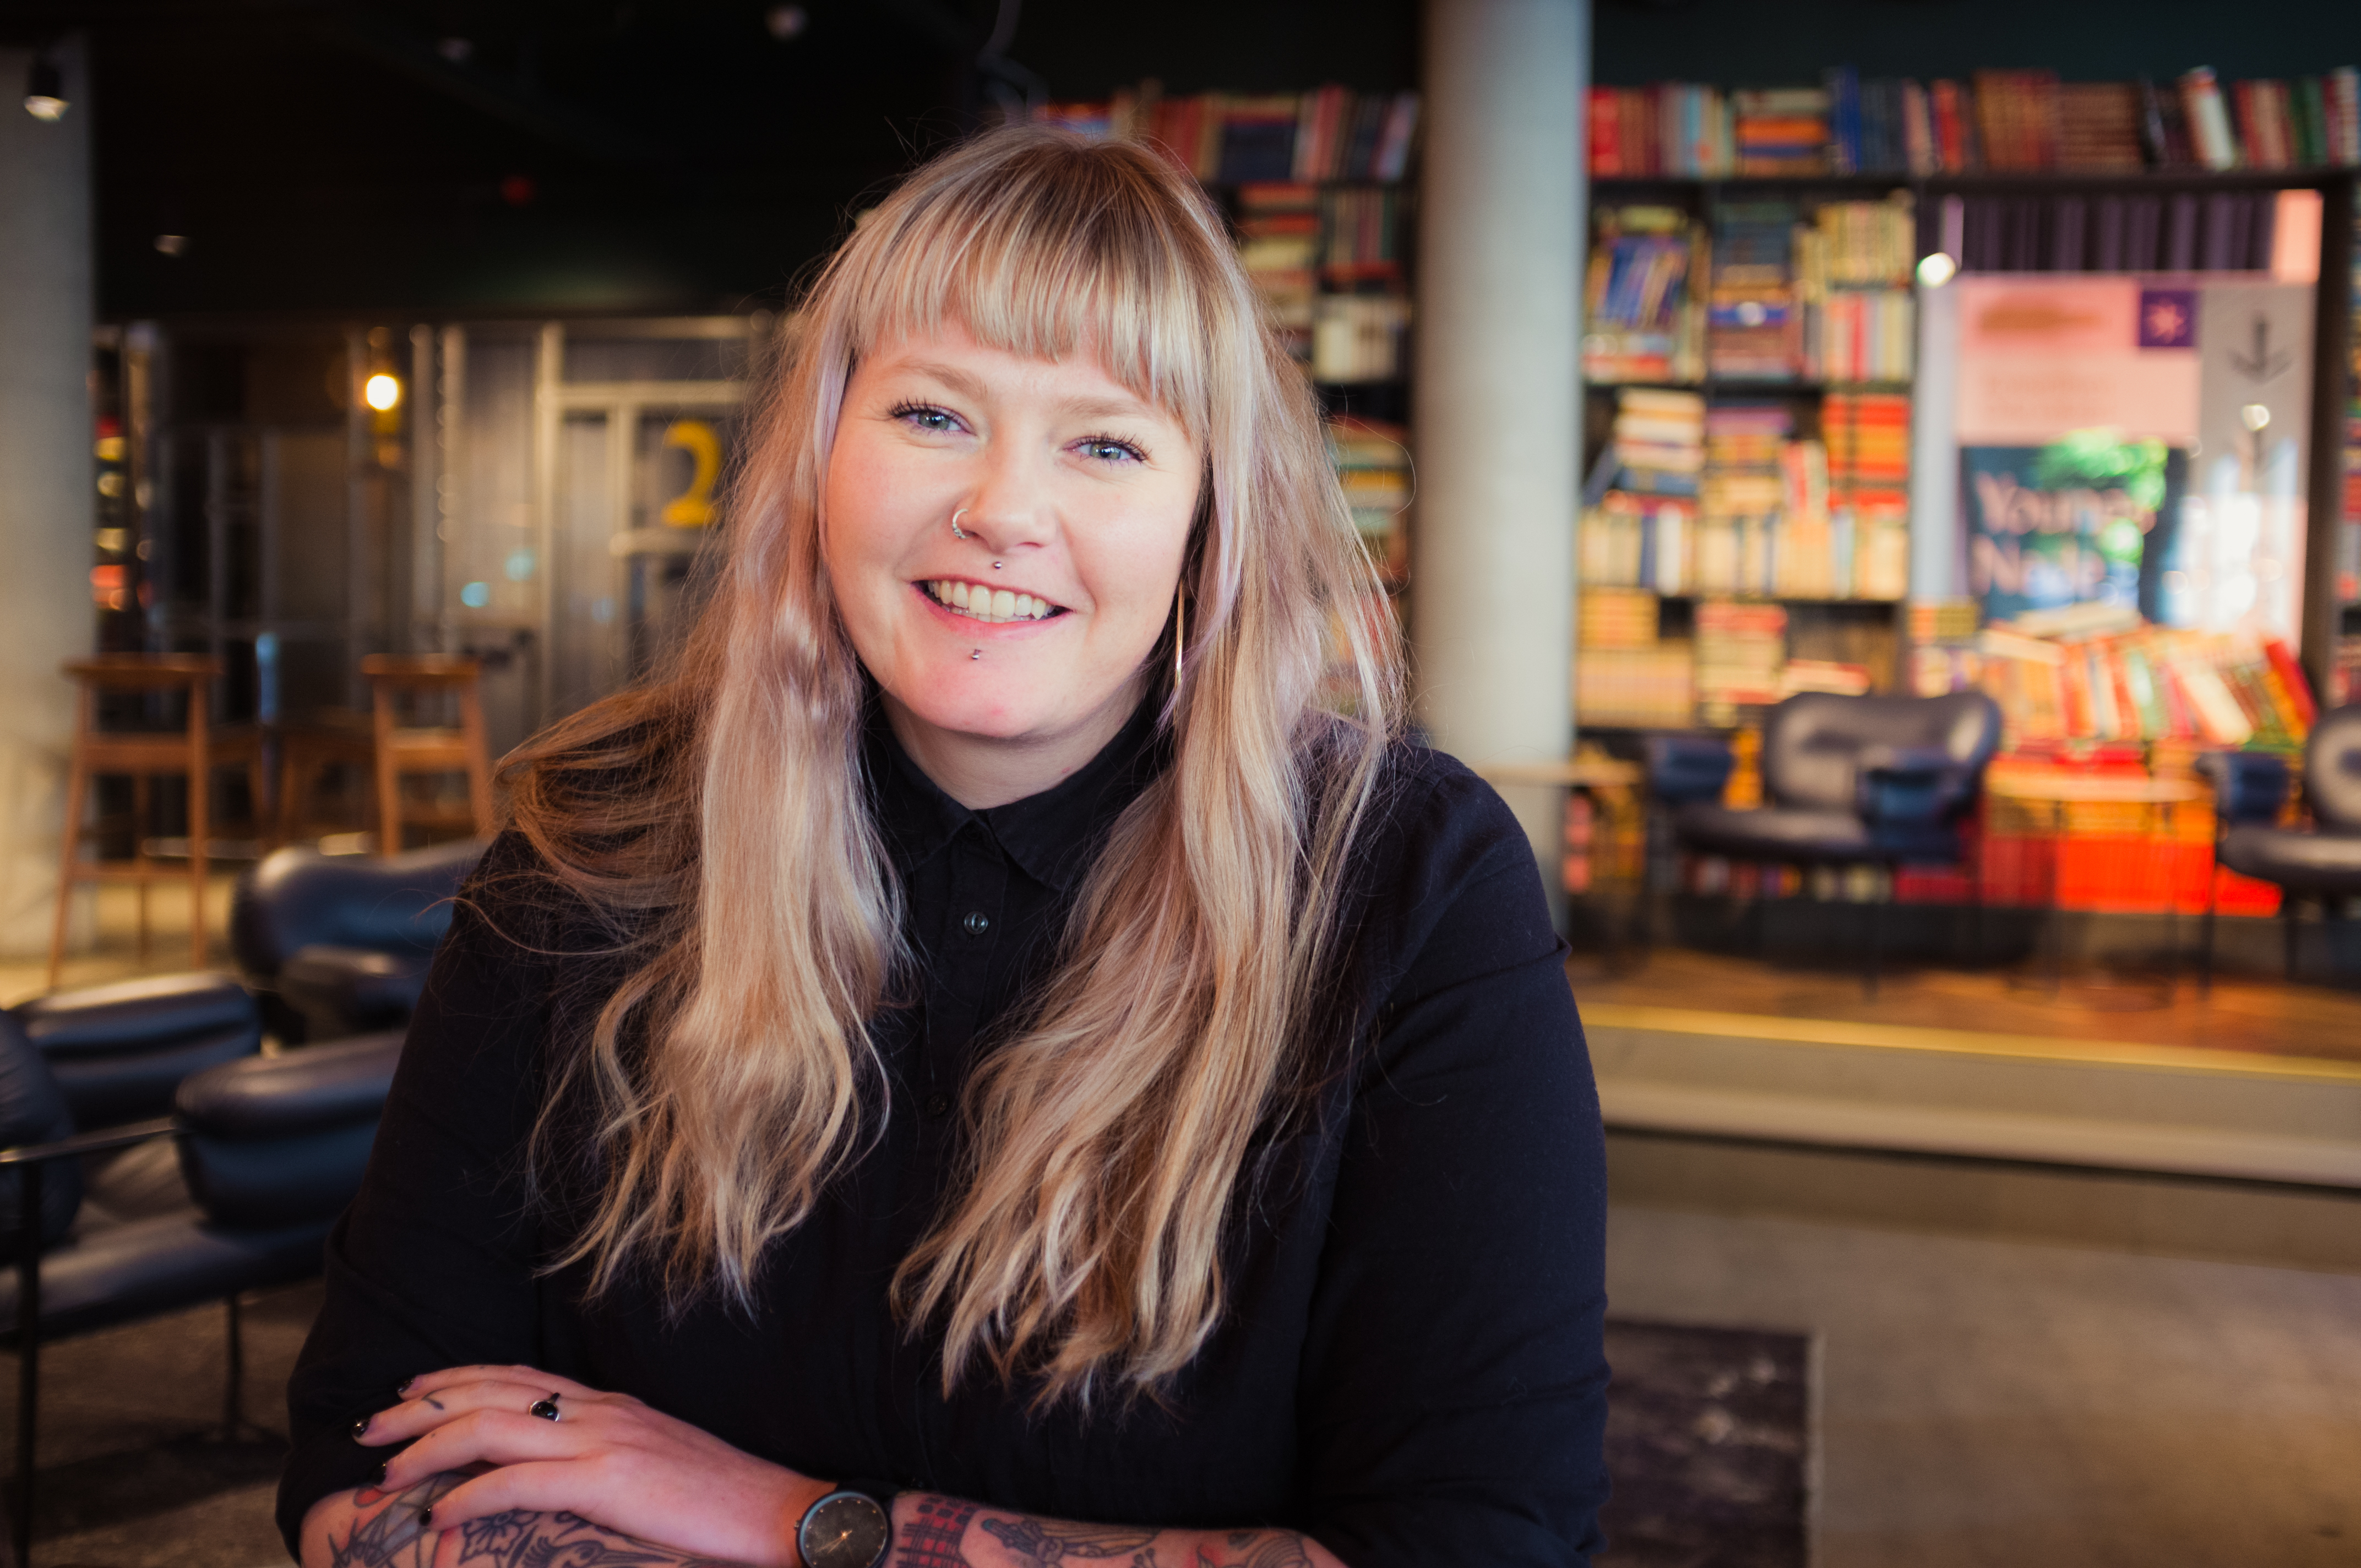 General Manager of Longyear United, Pernille Dragsten Holden is sitting by a table at Youngs in Oslo. She has long, blond hair, piercings and tattoos and is wearing a black shirt.